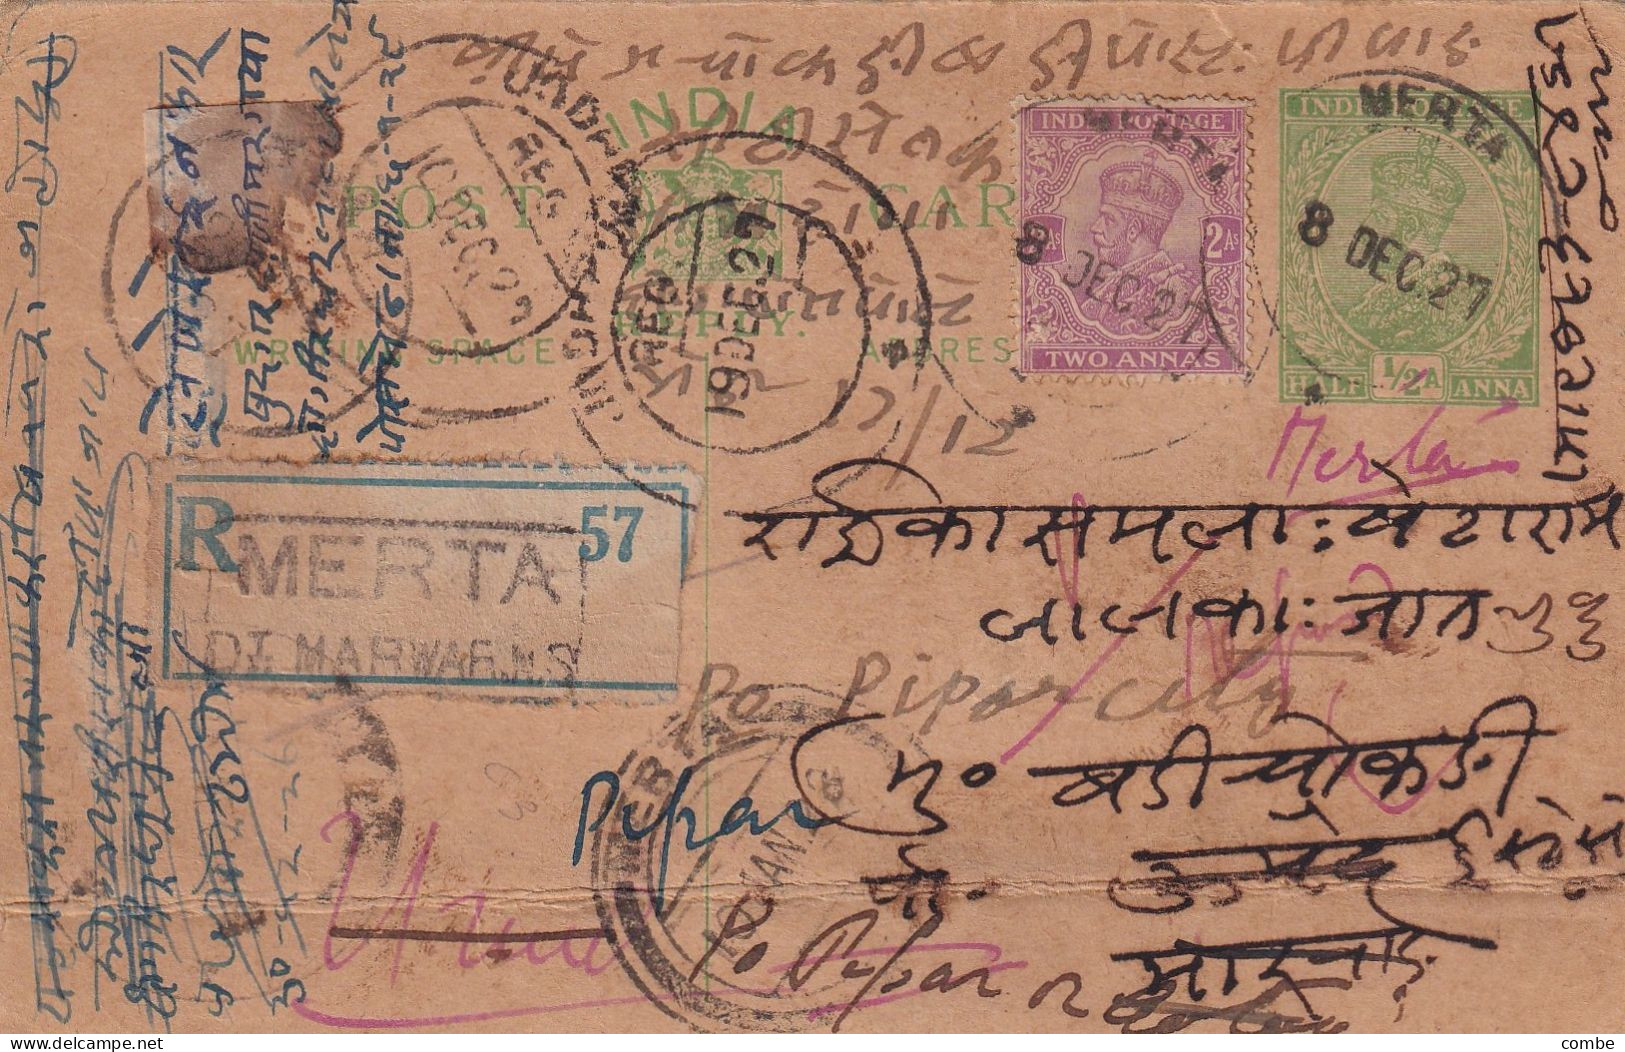 POSTCARD INDIA. 8 12 1927. STATIONNERY 1/2A + 2As. REGISTERED MERTA. ATTEMPTED DELIVERY 0N 10 DEC . 19 DEC REFUSED...... - 1911-35 King George V